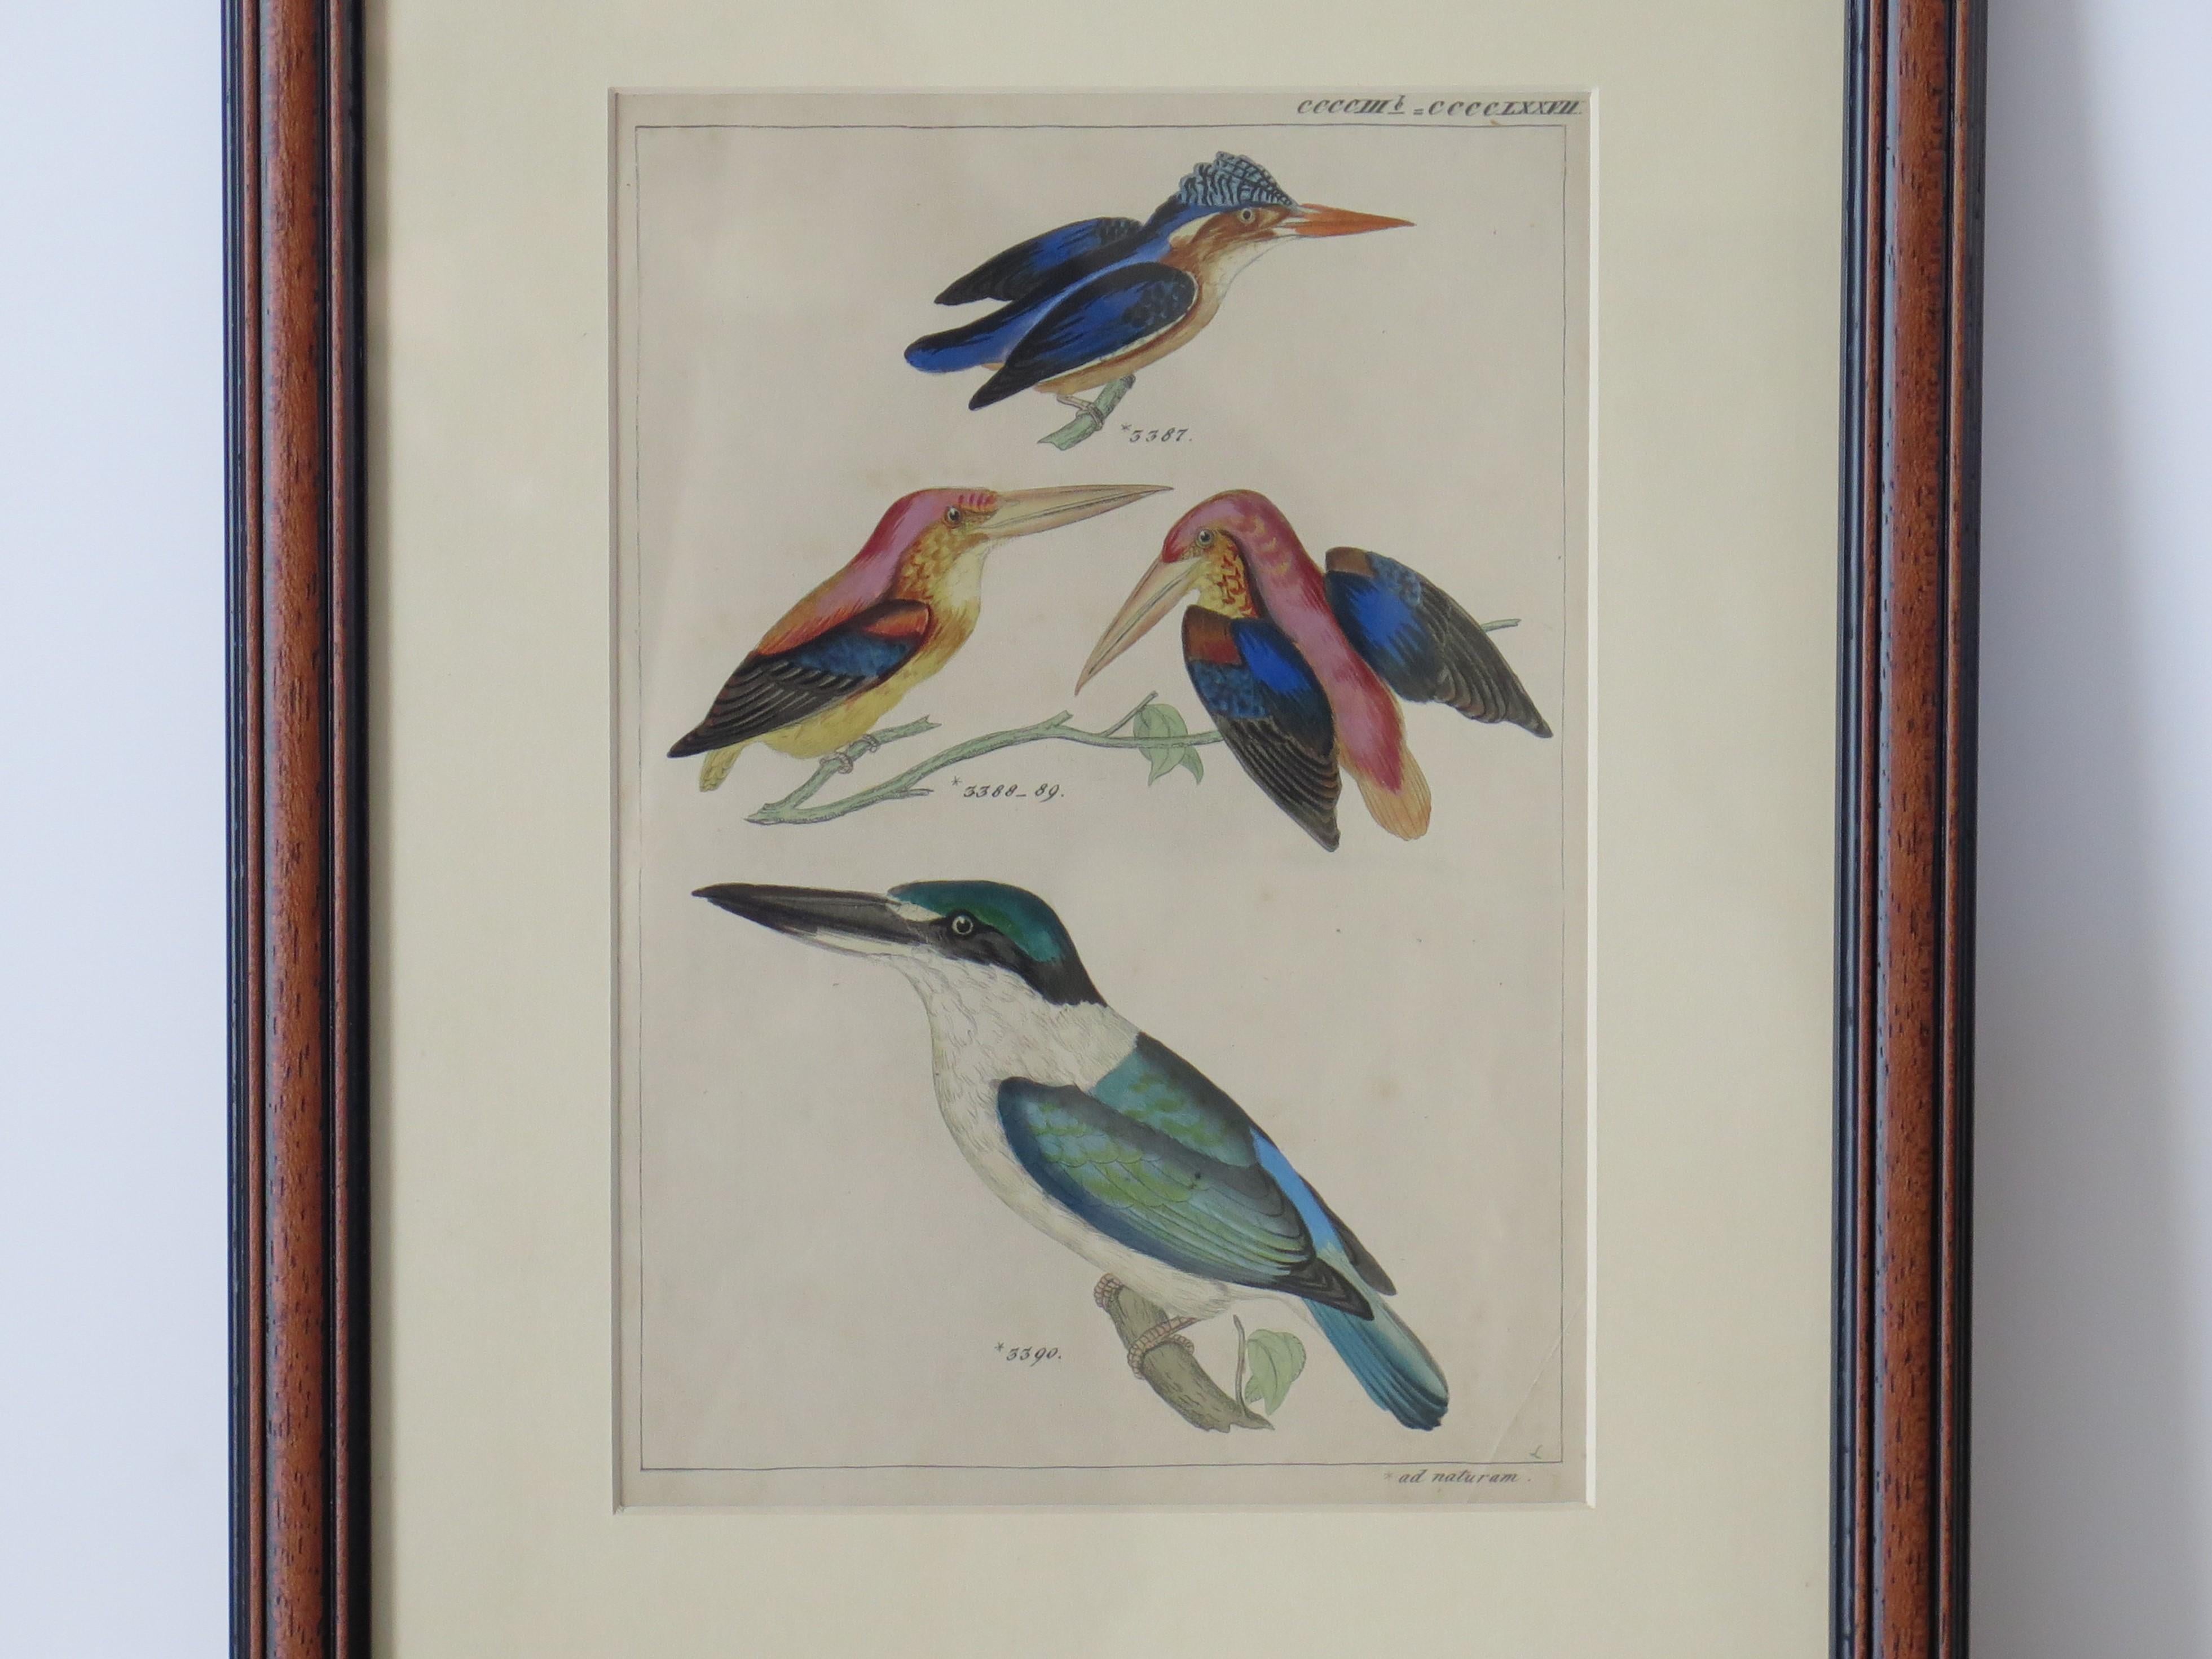 This is a hand coloured framed engraving of a study of Kingfisher birds all in the manner of Audubon Birds of America and dating to the Mid 19th Century.

The study shows four Kingfishers, three of which are different types with one pair of birds.